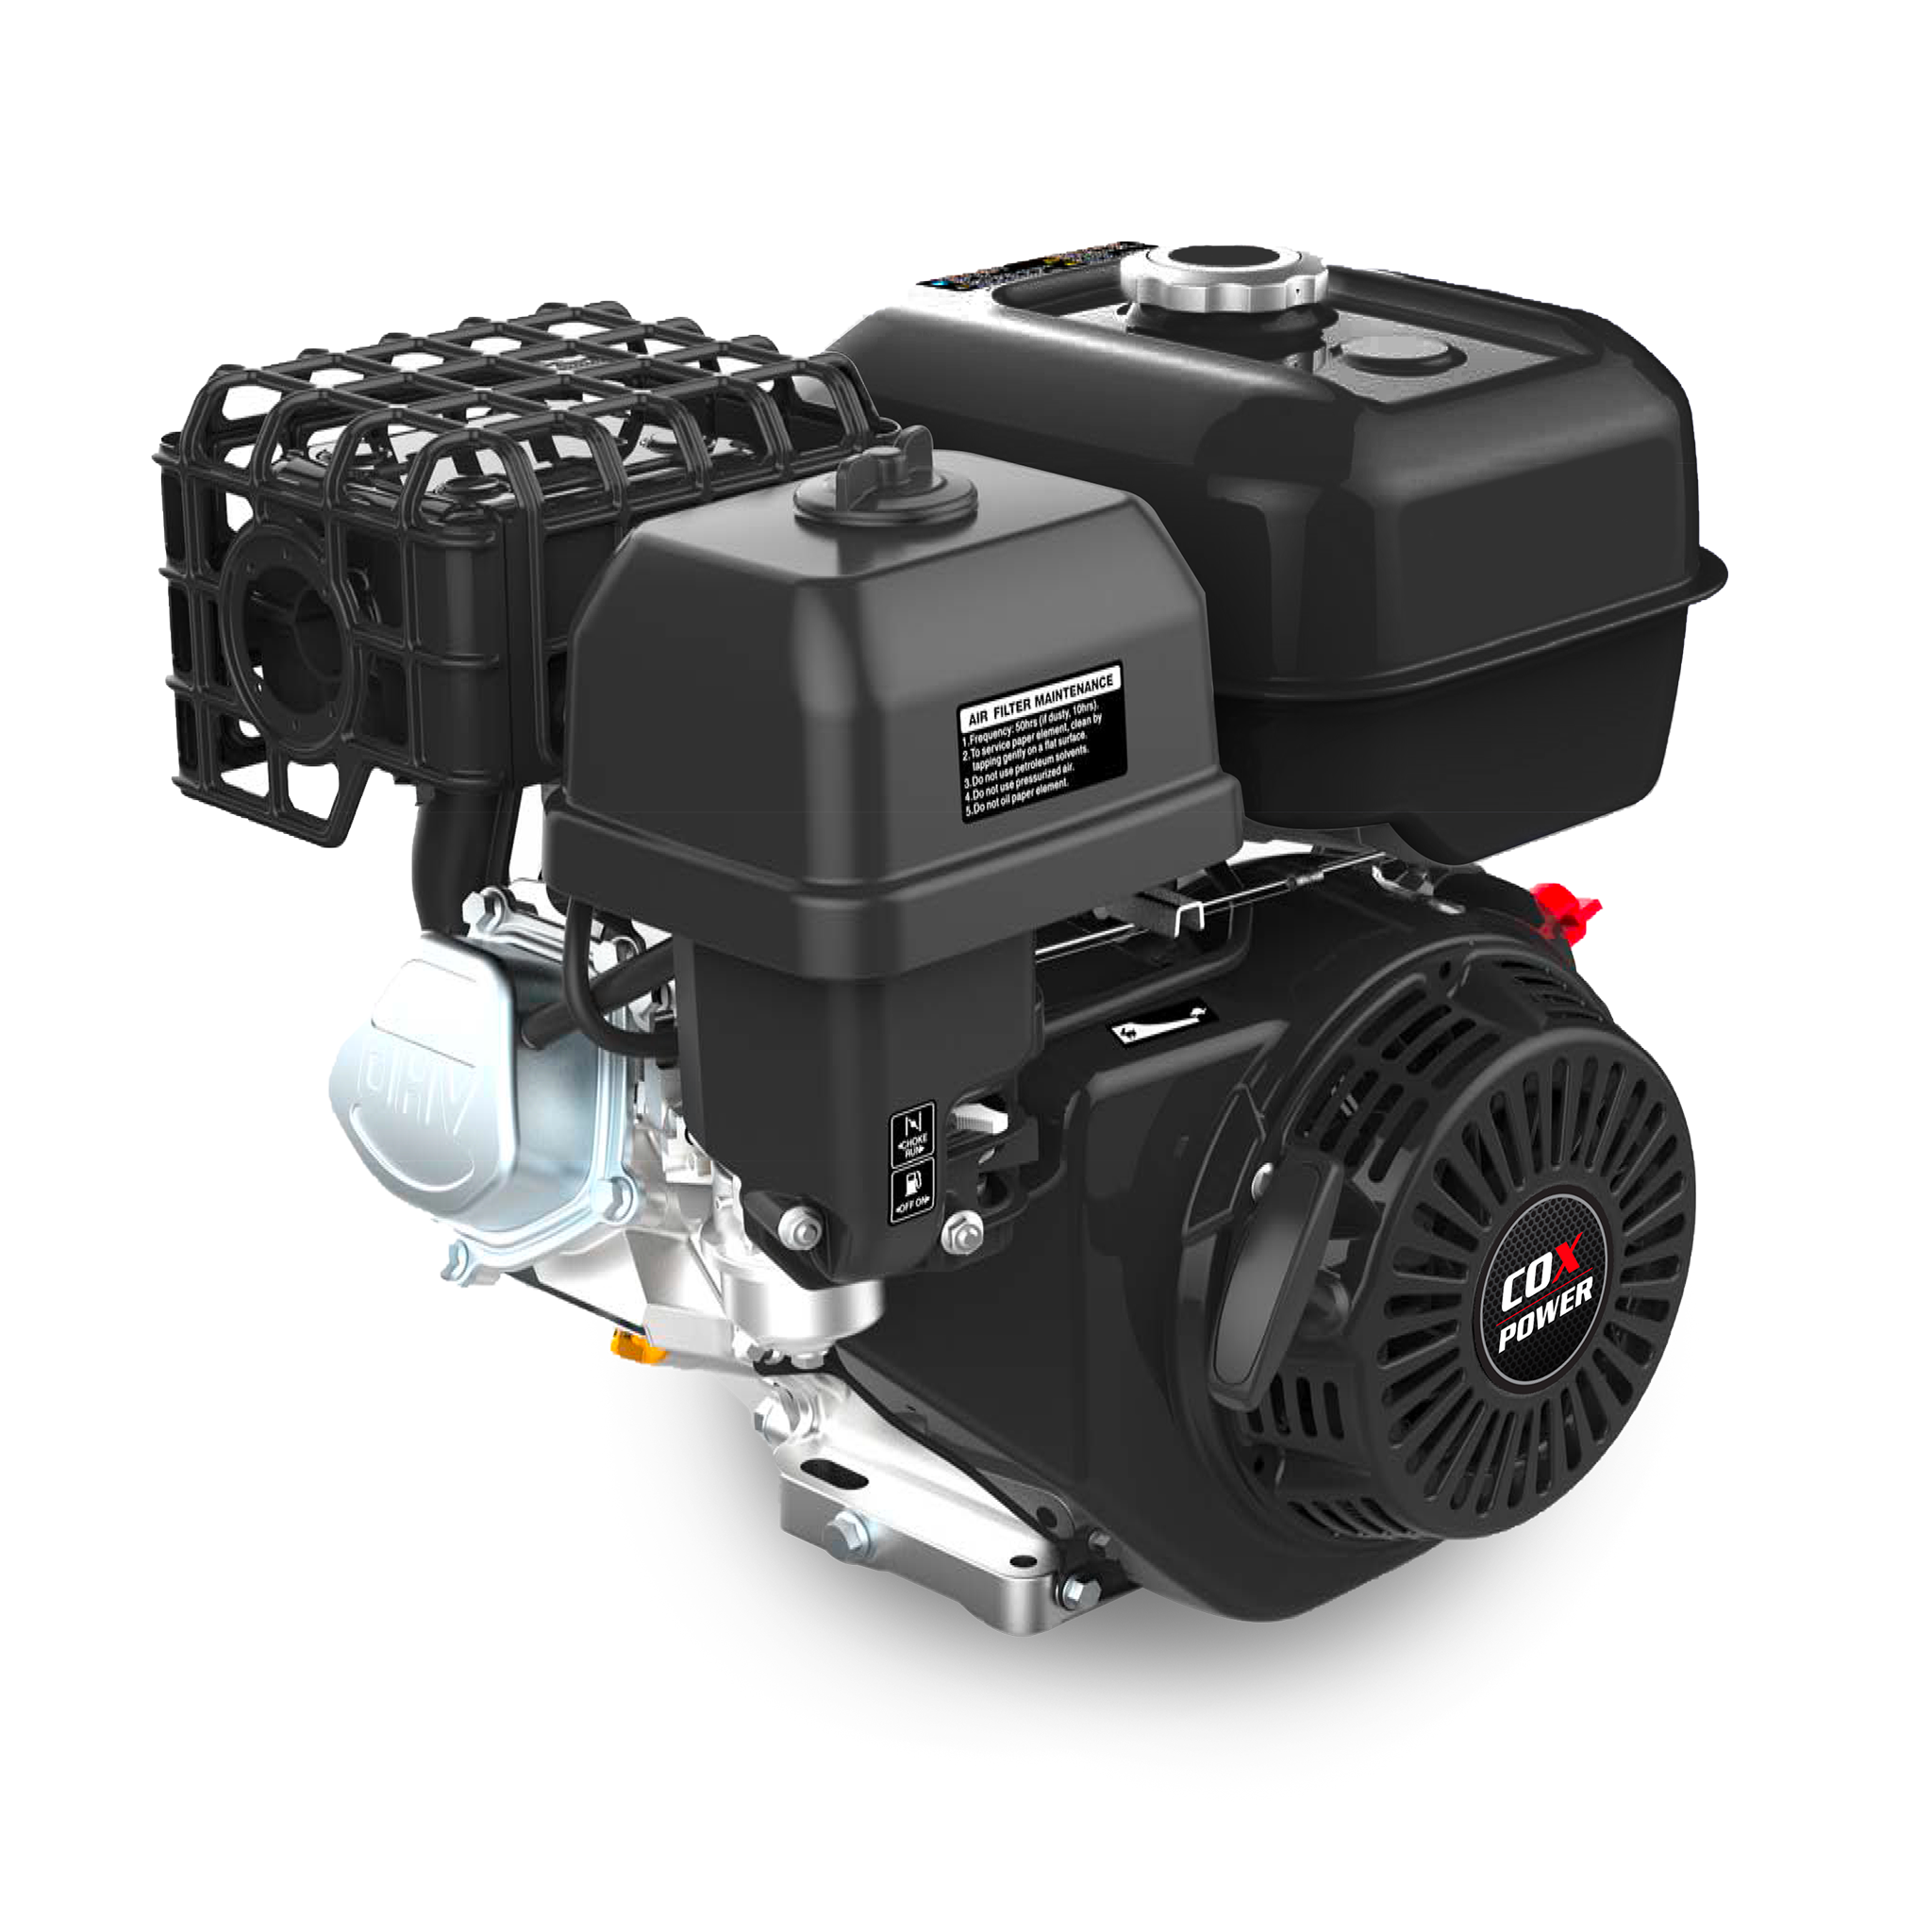 COX Power product image of a 11hp Keyway Shaft Horizontal Engine with a recoil start